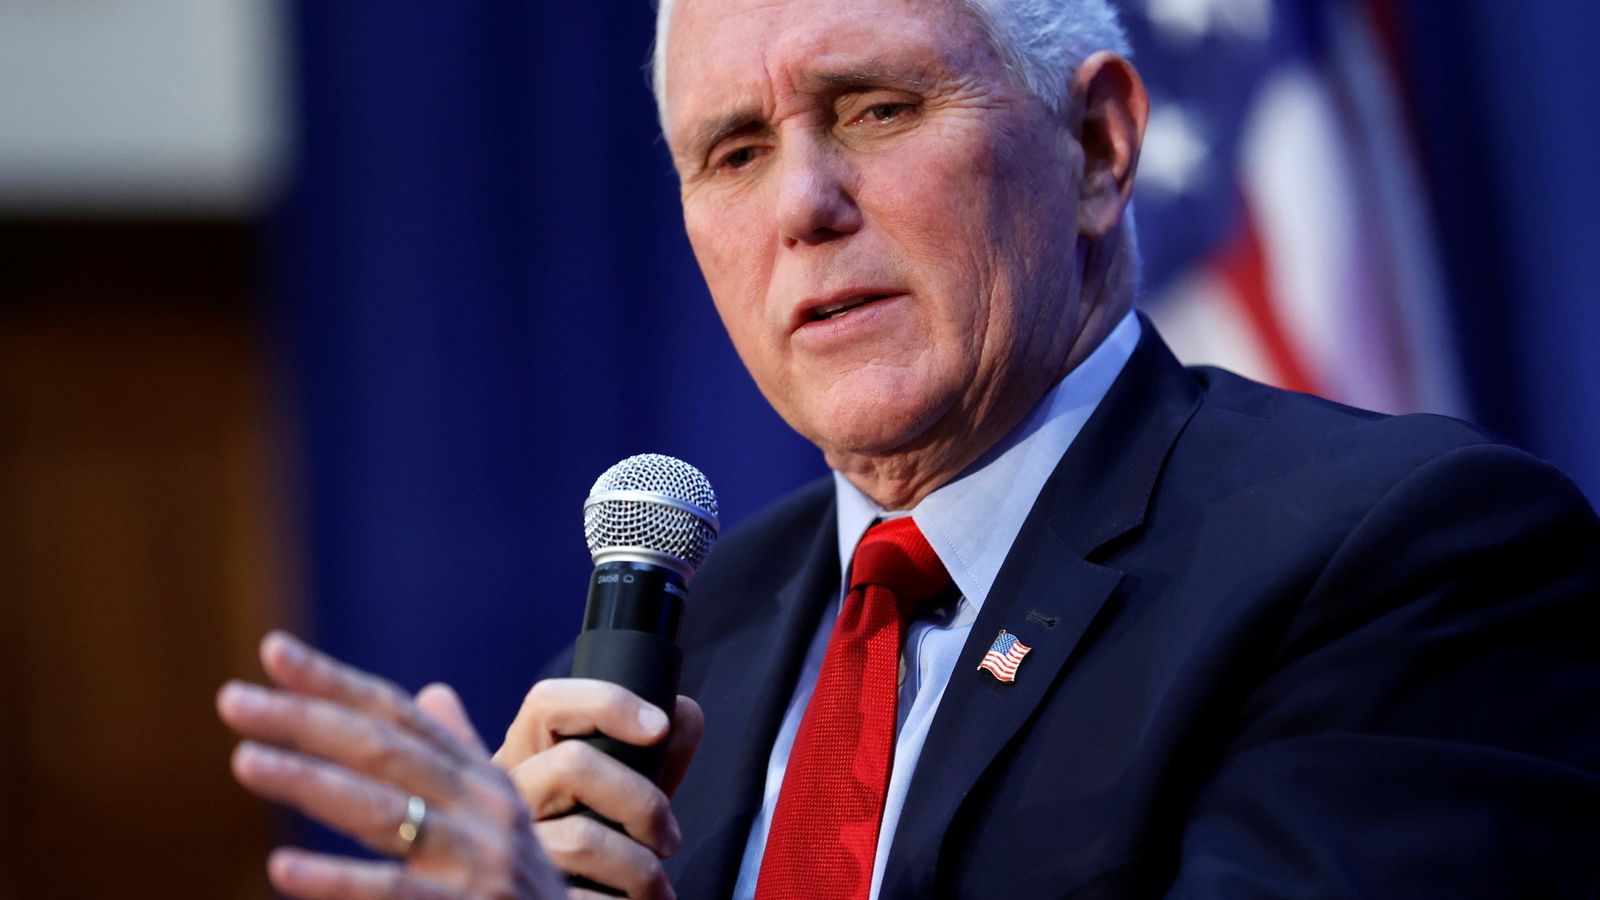 Mike Pence: Former VP's team denies he has filed to run for president in 2024